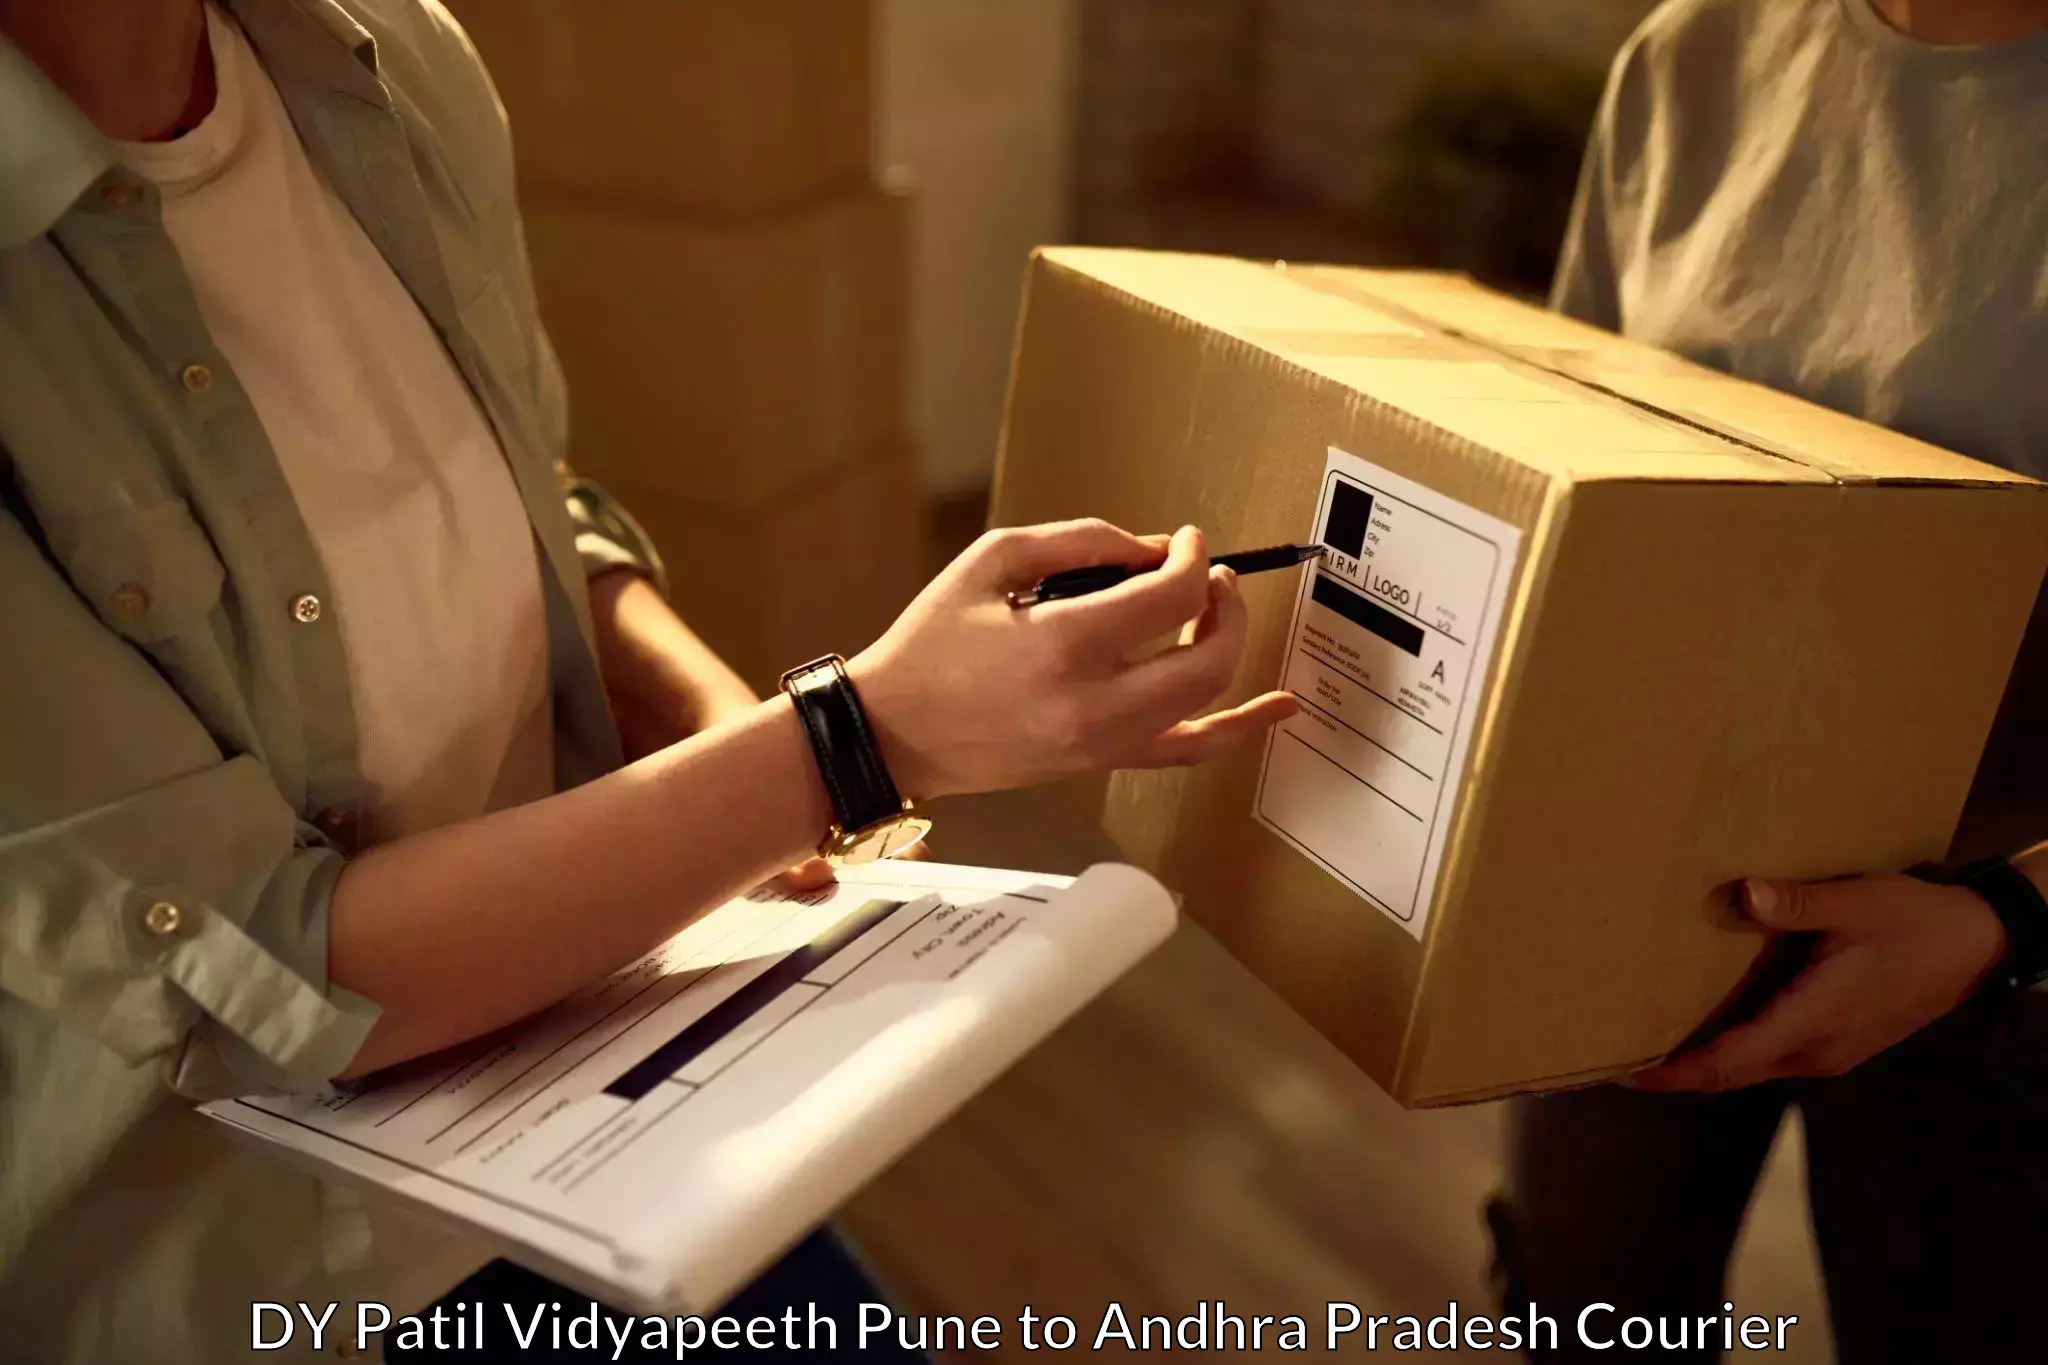 Reliable delivery network DY Patil Vidyapeeth Pune to Andhra Pradesh